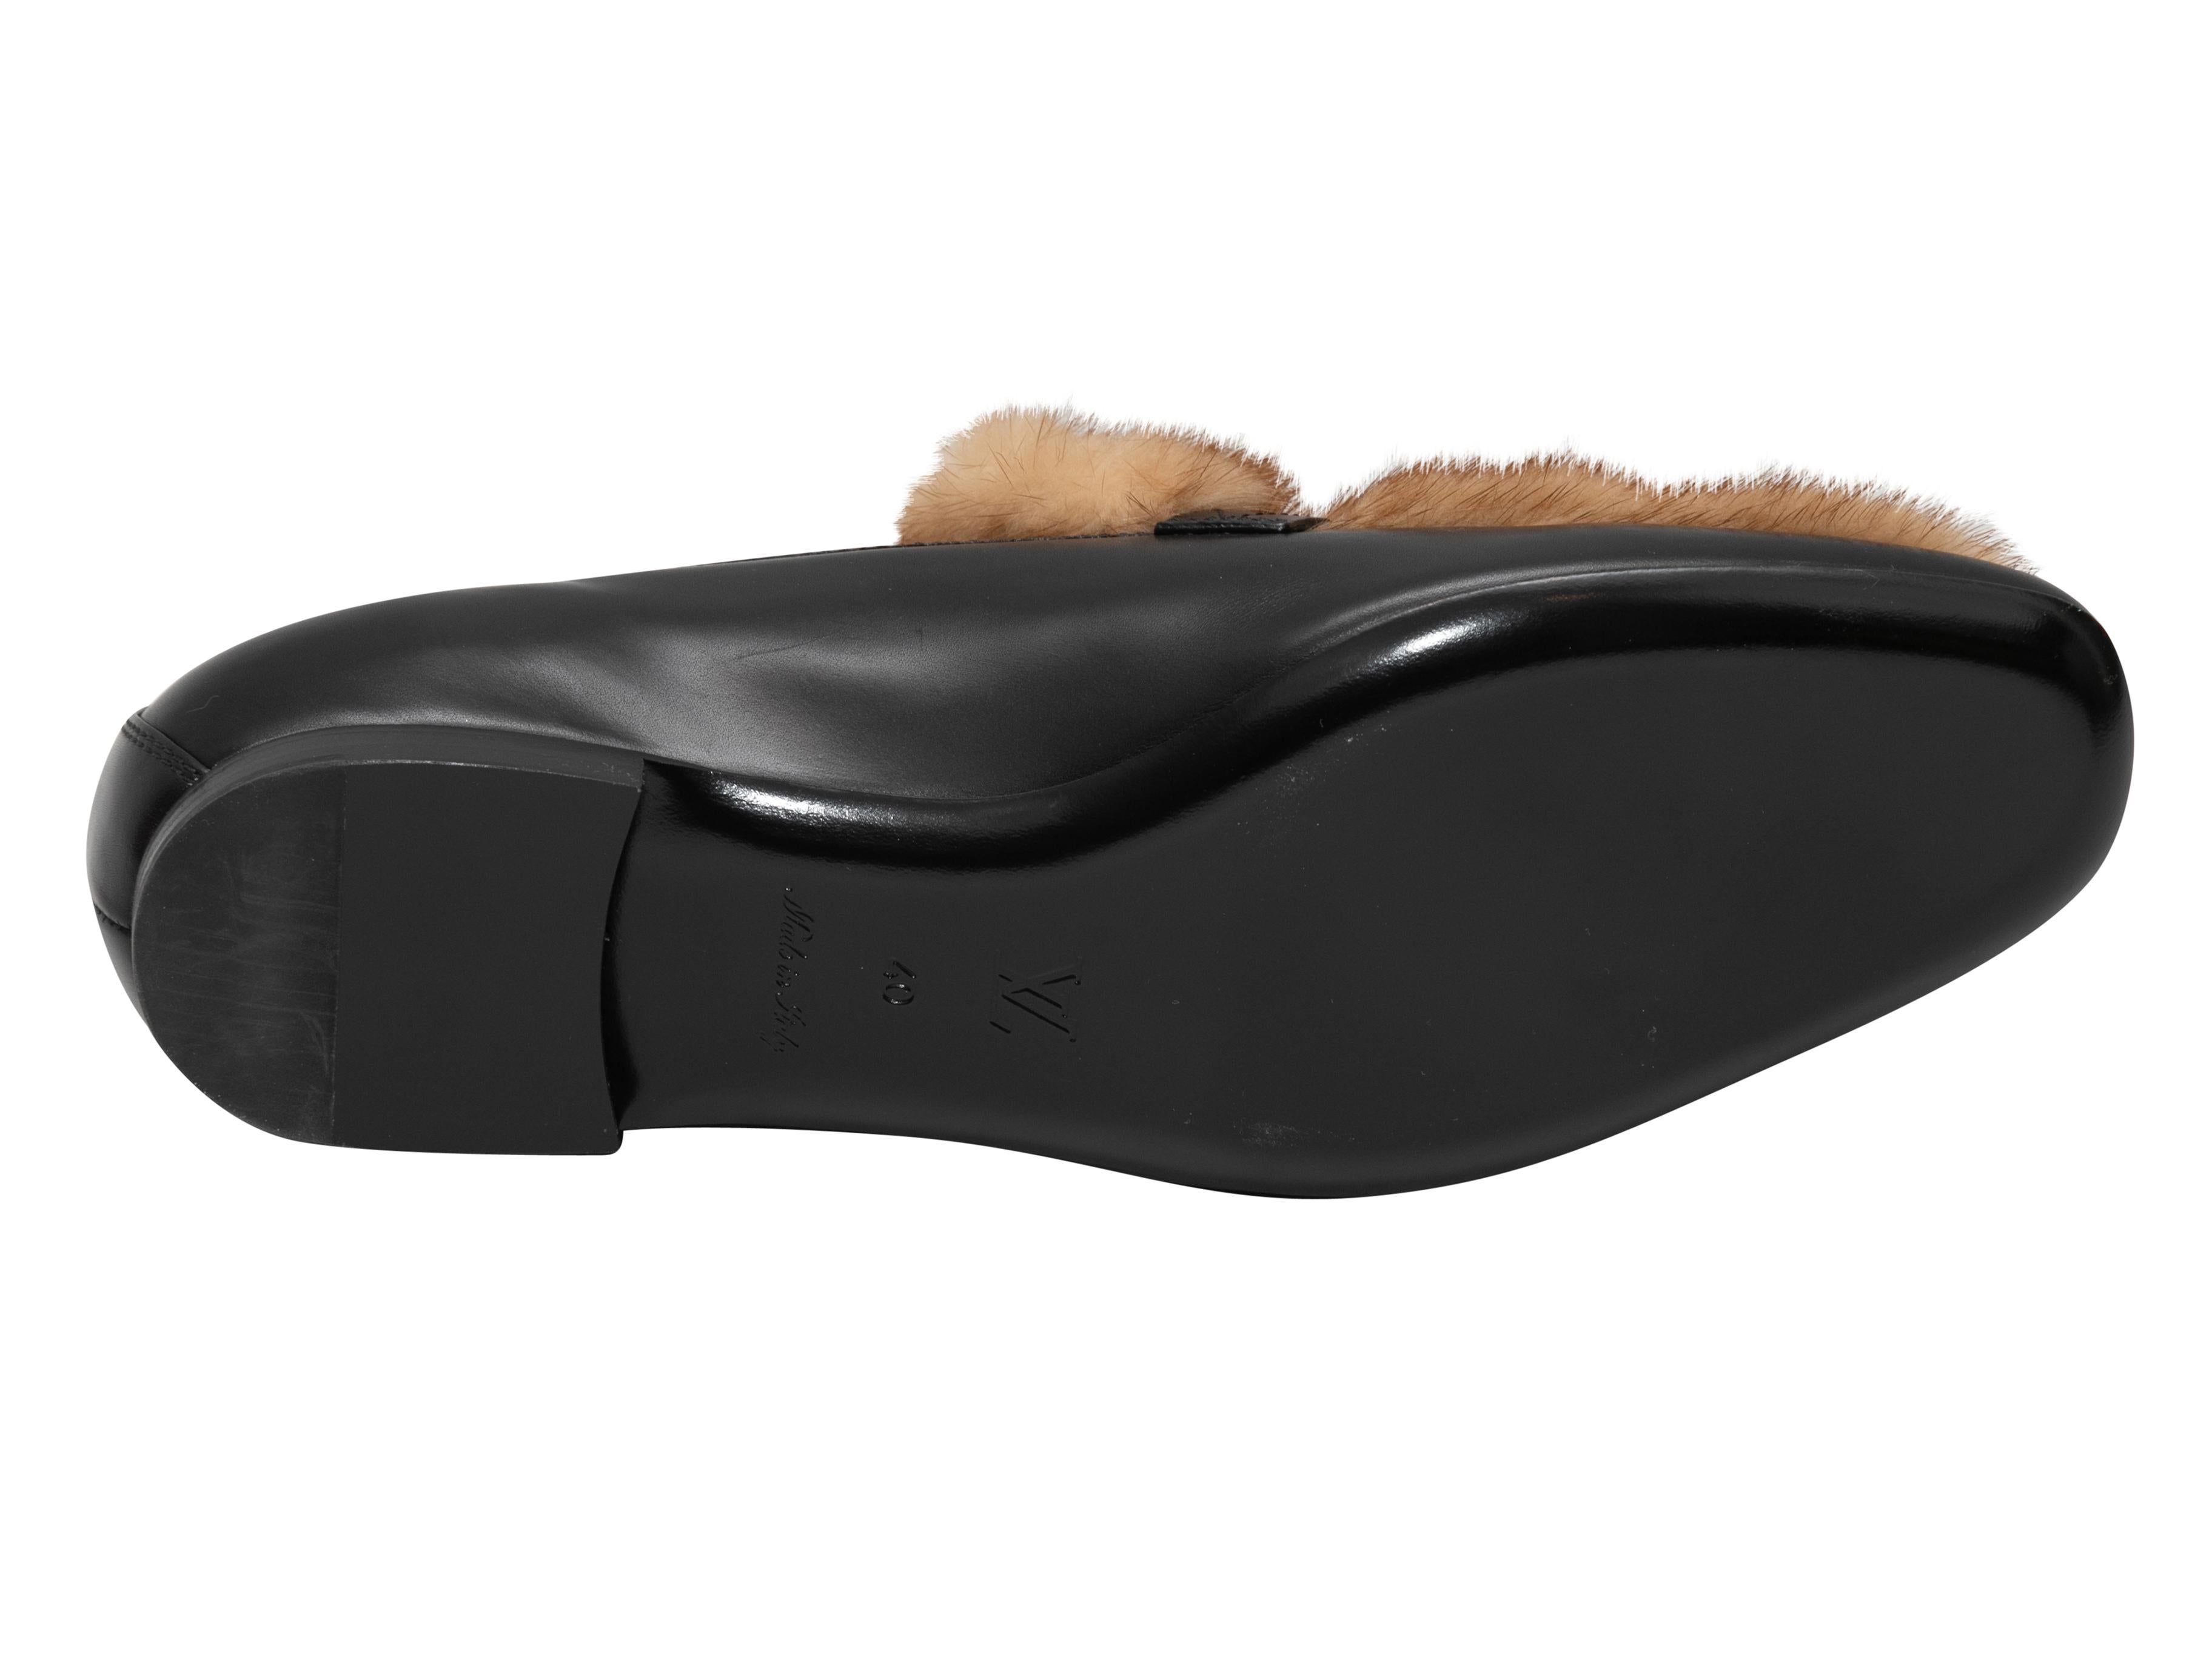 Black leather and brown mink fur loafers by Louis Vuitton. Gold-tone LV logo hardware at tops. Stacked heels 0.25